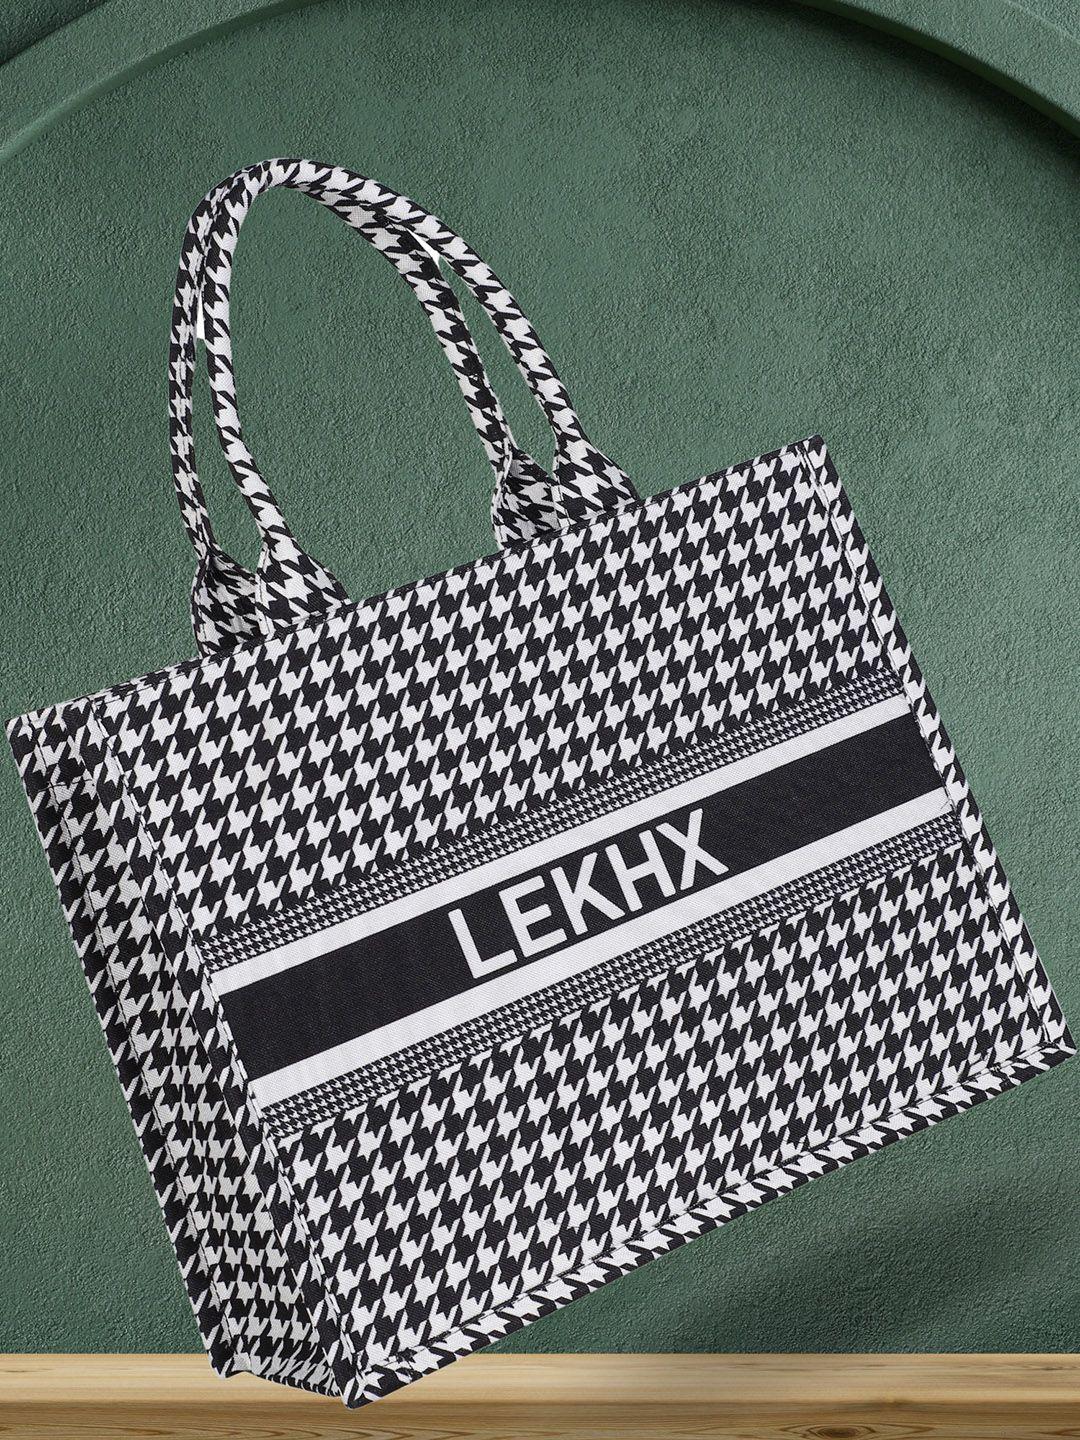 lekhx typography printed structured tote bag